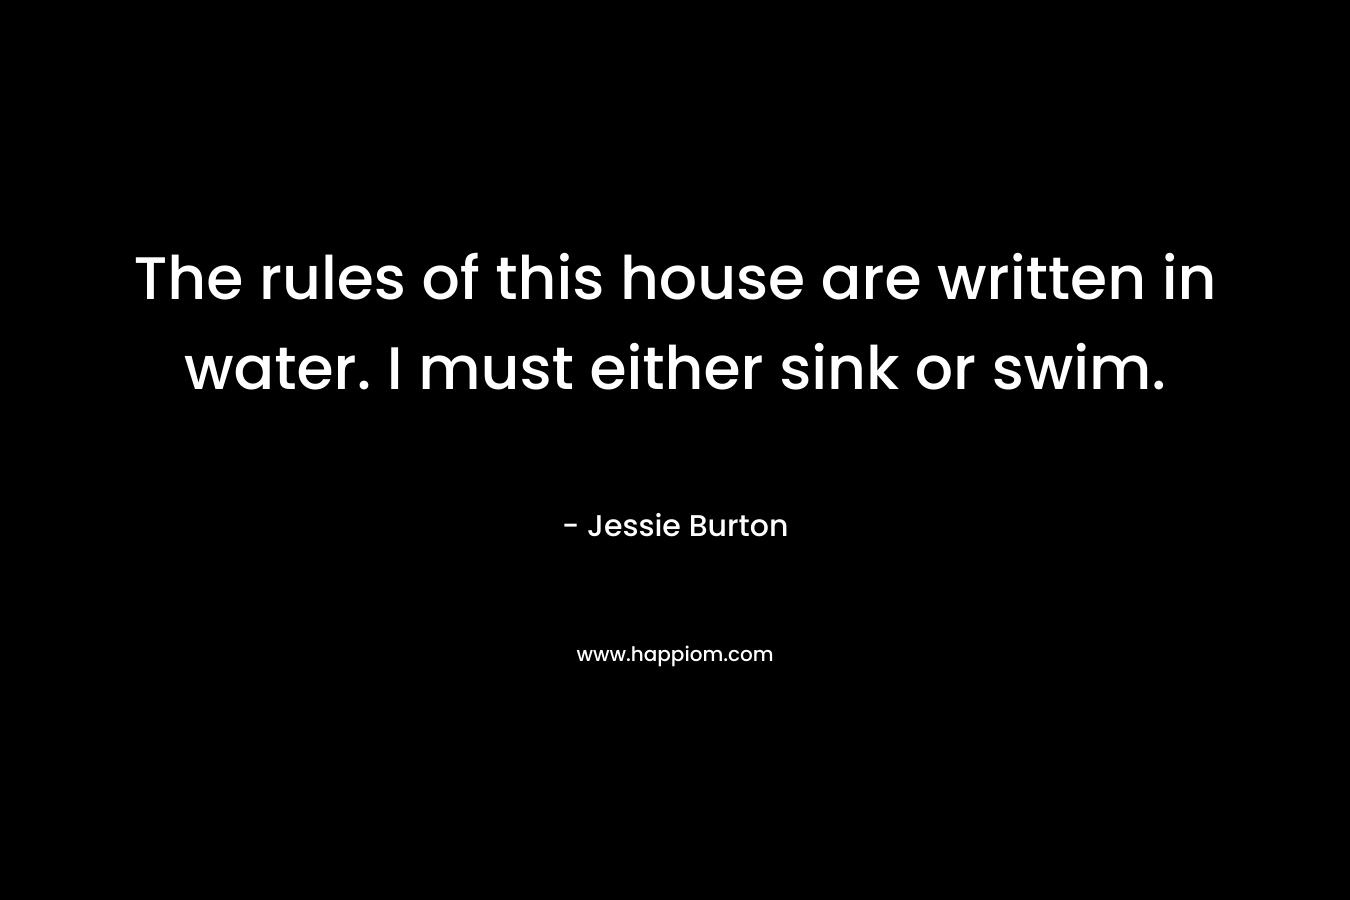 The rules of this house are written in water. I must either sink or swim. – Jessie Burton